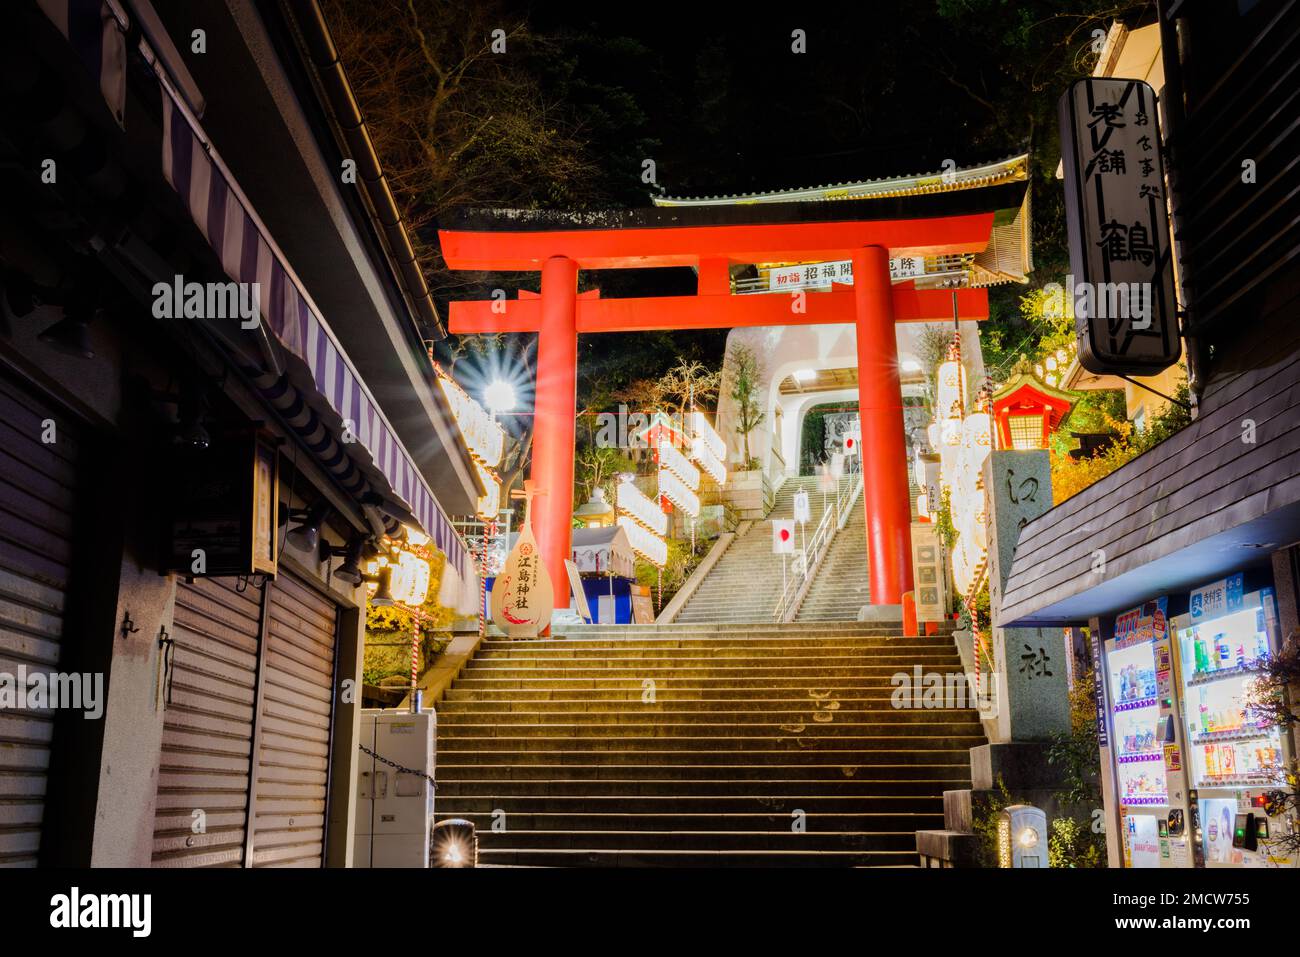 The vivid, vermilion lacquered torii is the gateway to the large Enoshima Shrine complex that consists of three main shrines located at the top of a w Stock Photo